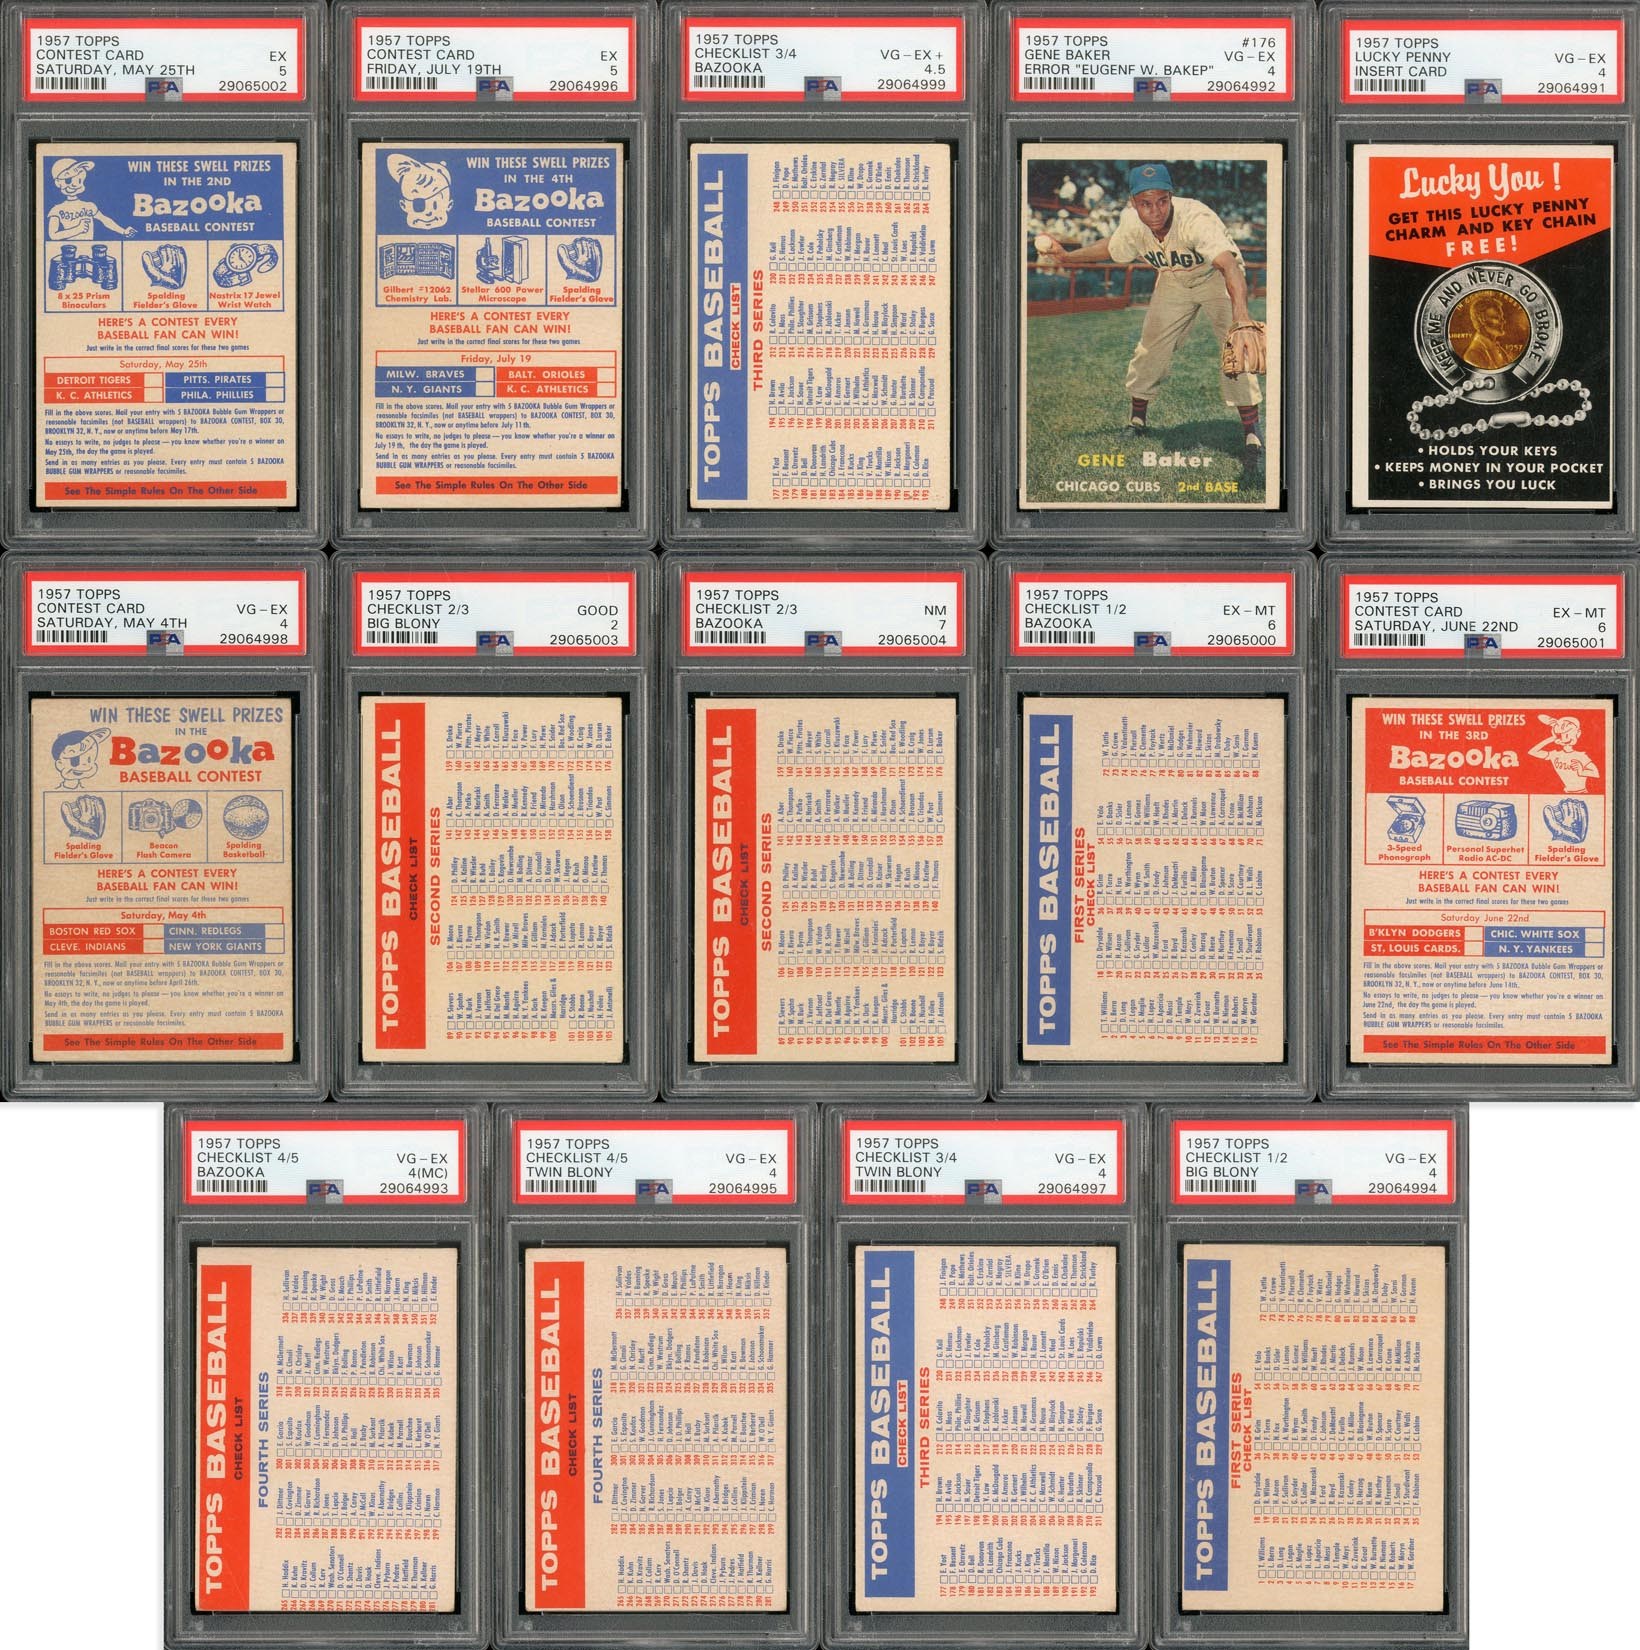 Baseball and Trading Cards - 1957 Topps HIGH GRADE Checklist/Contest/Variation Lot of 14 Cards (All PSA Graded)